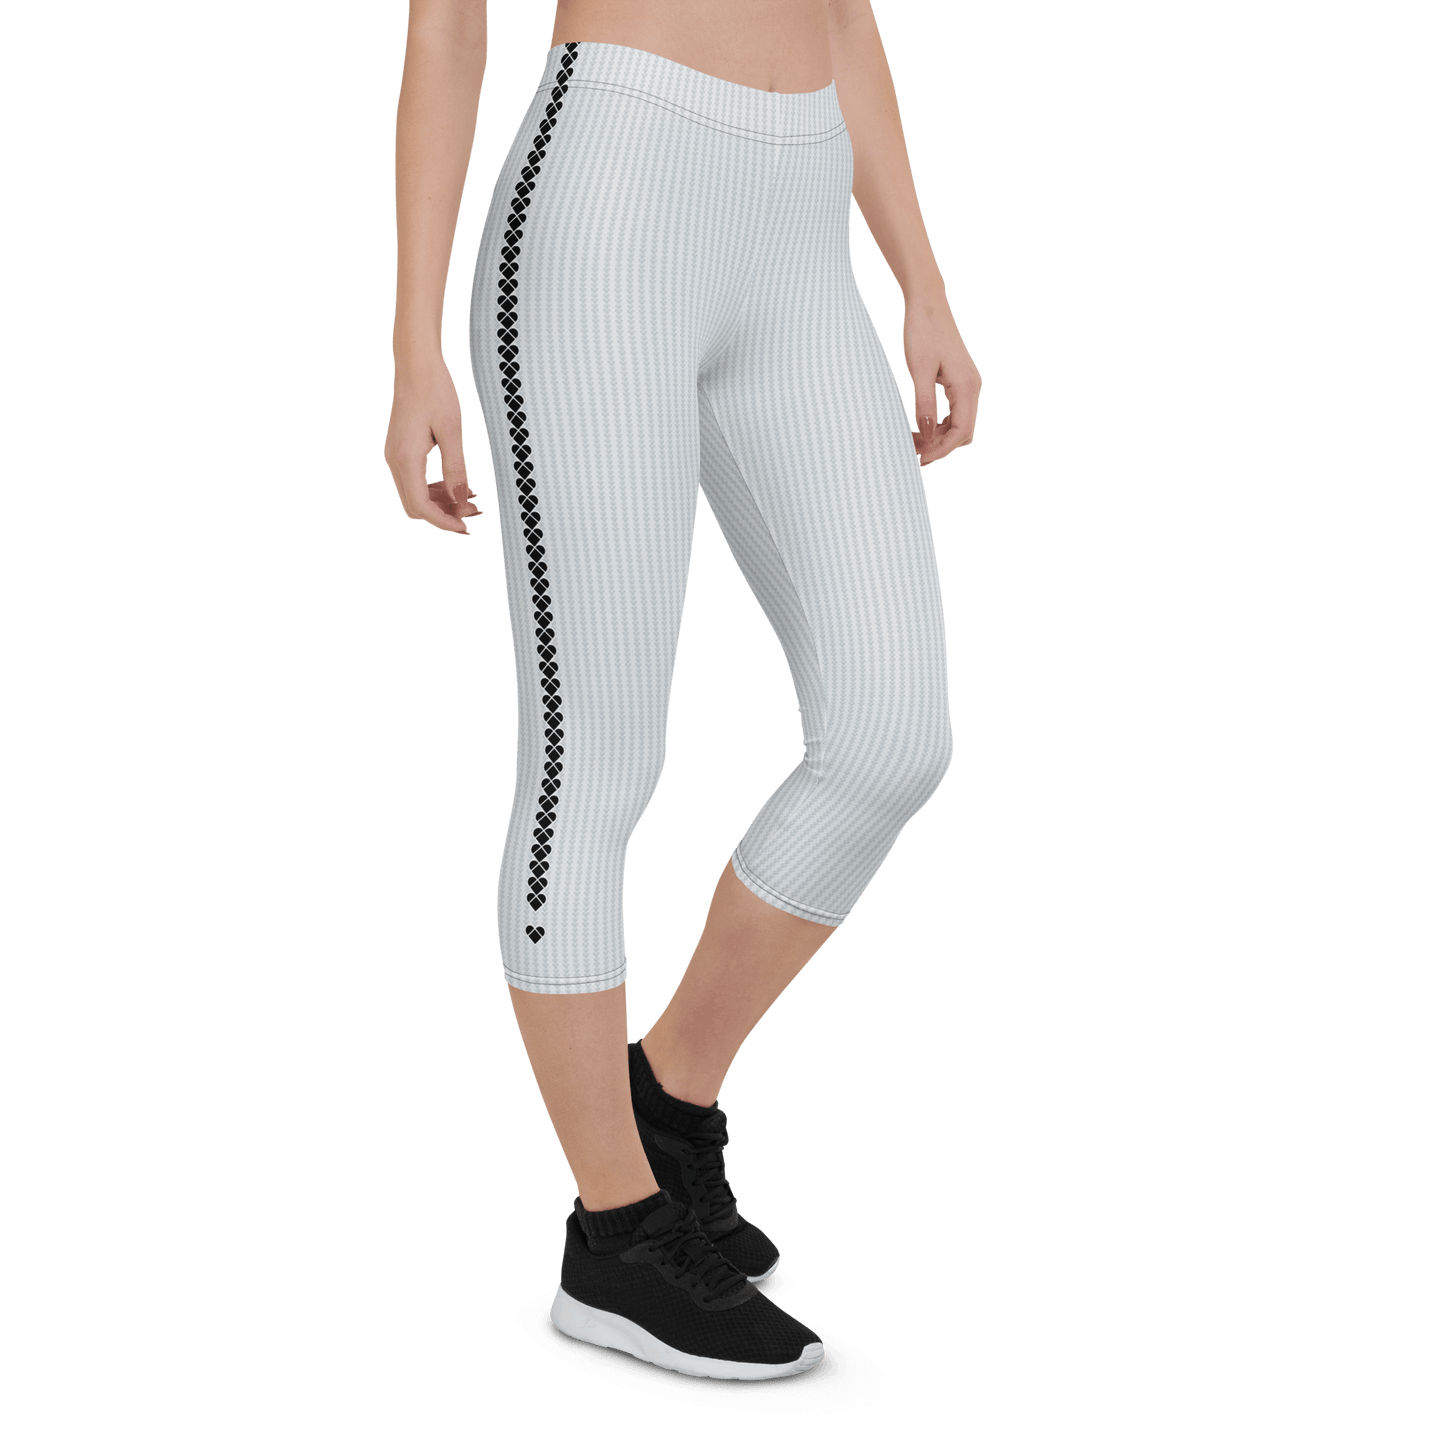 stylish heart brand capris, perfect for gym or lounge